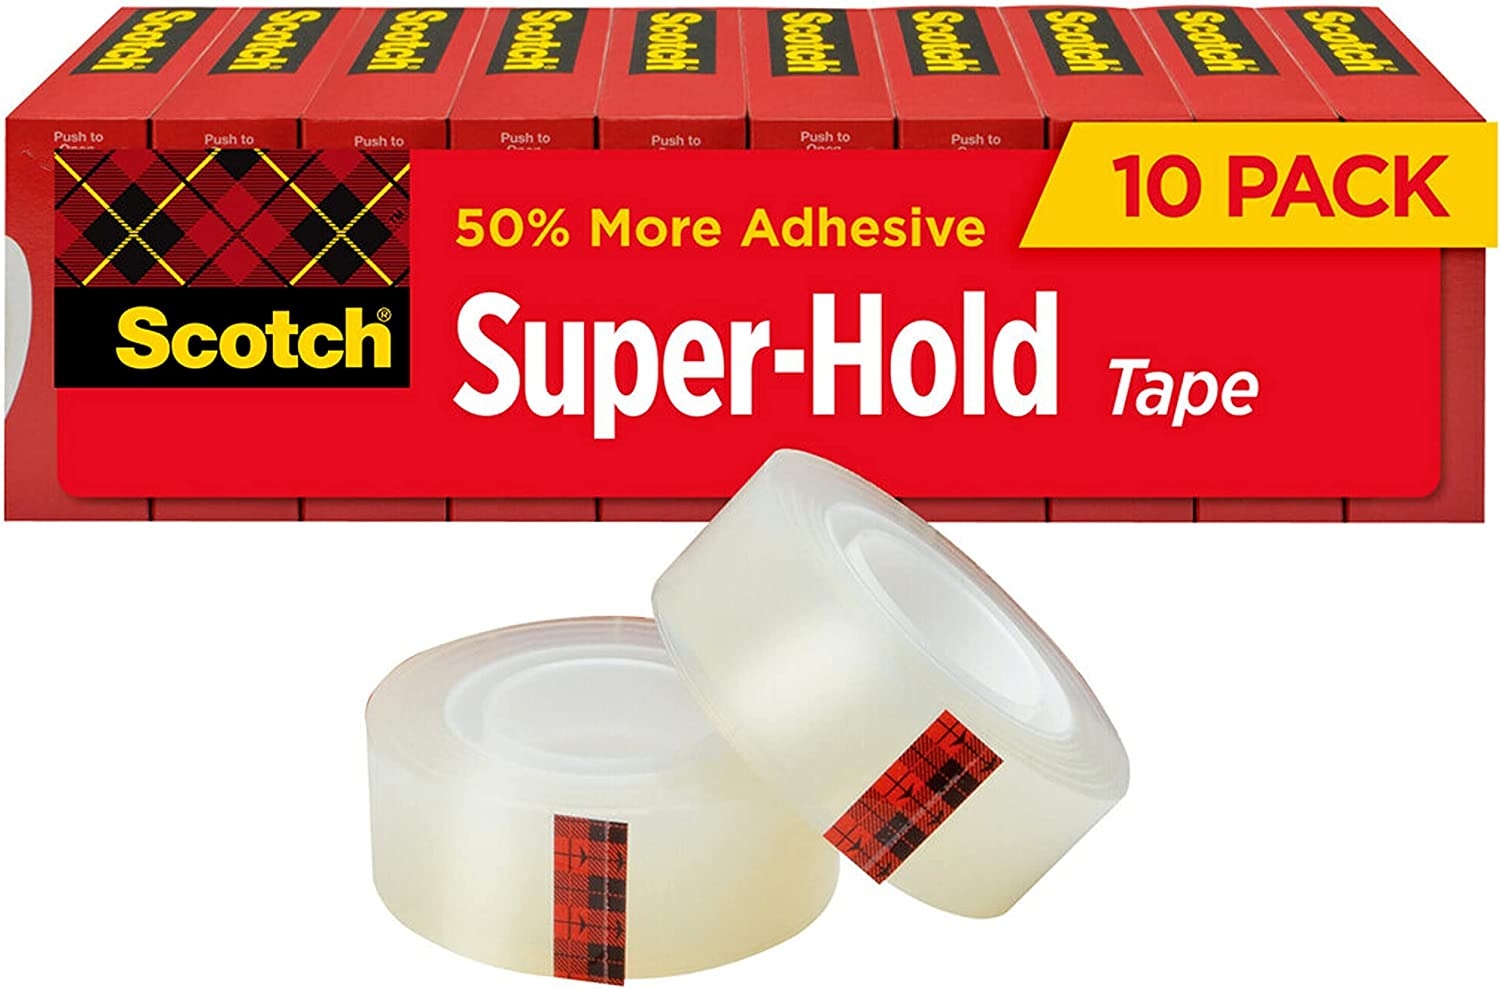 ''Scotch Super-Hold TAPE, 10 Rolls, Transparent Finish, 50% More Adhesive, Trusted Favorite, 3/4 x 80